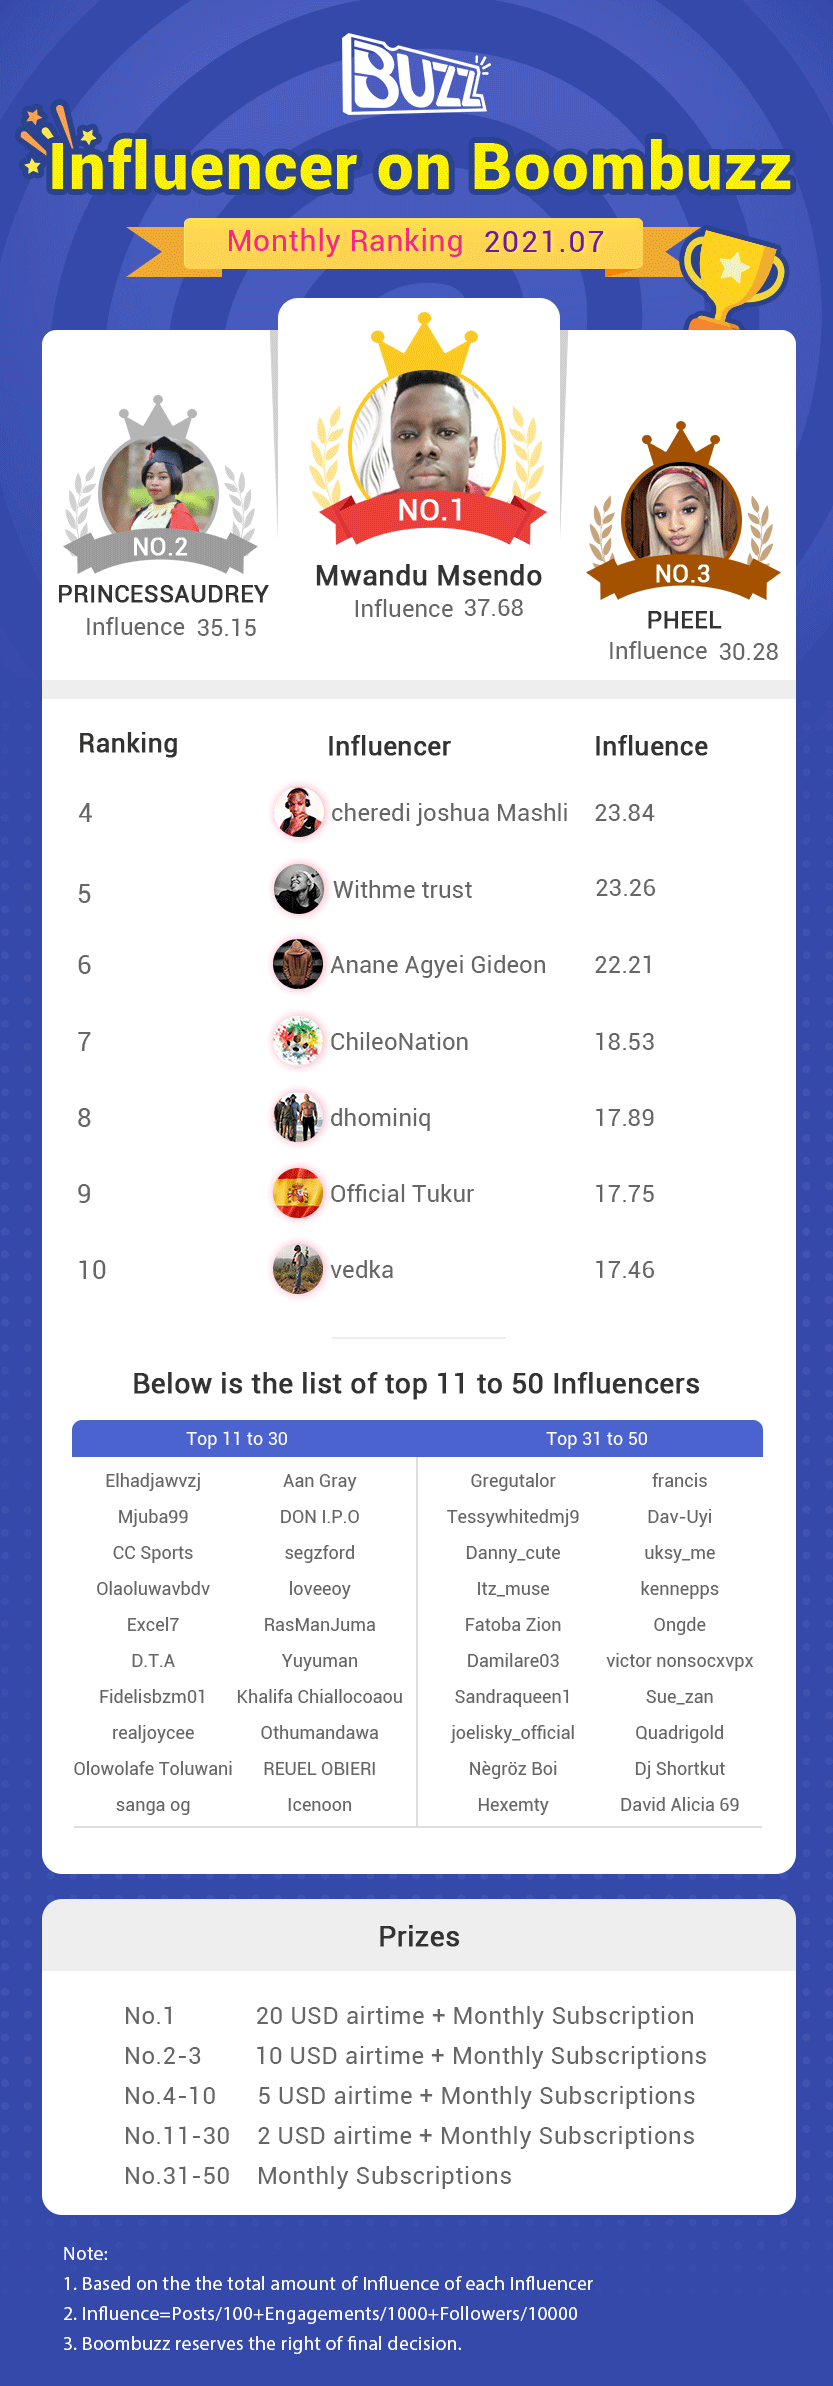 Influencer on Boombuzz | Influencer Monthly Ranking_July (results)